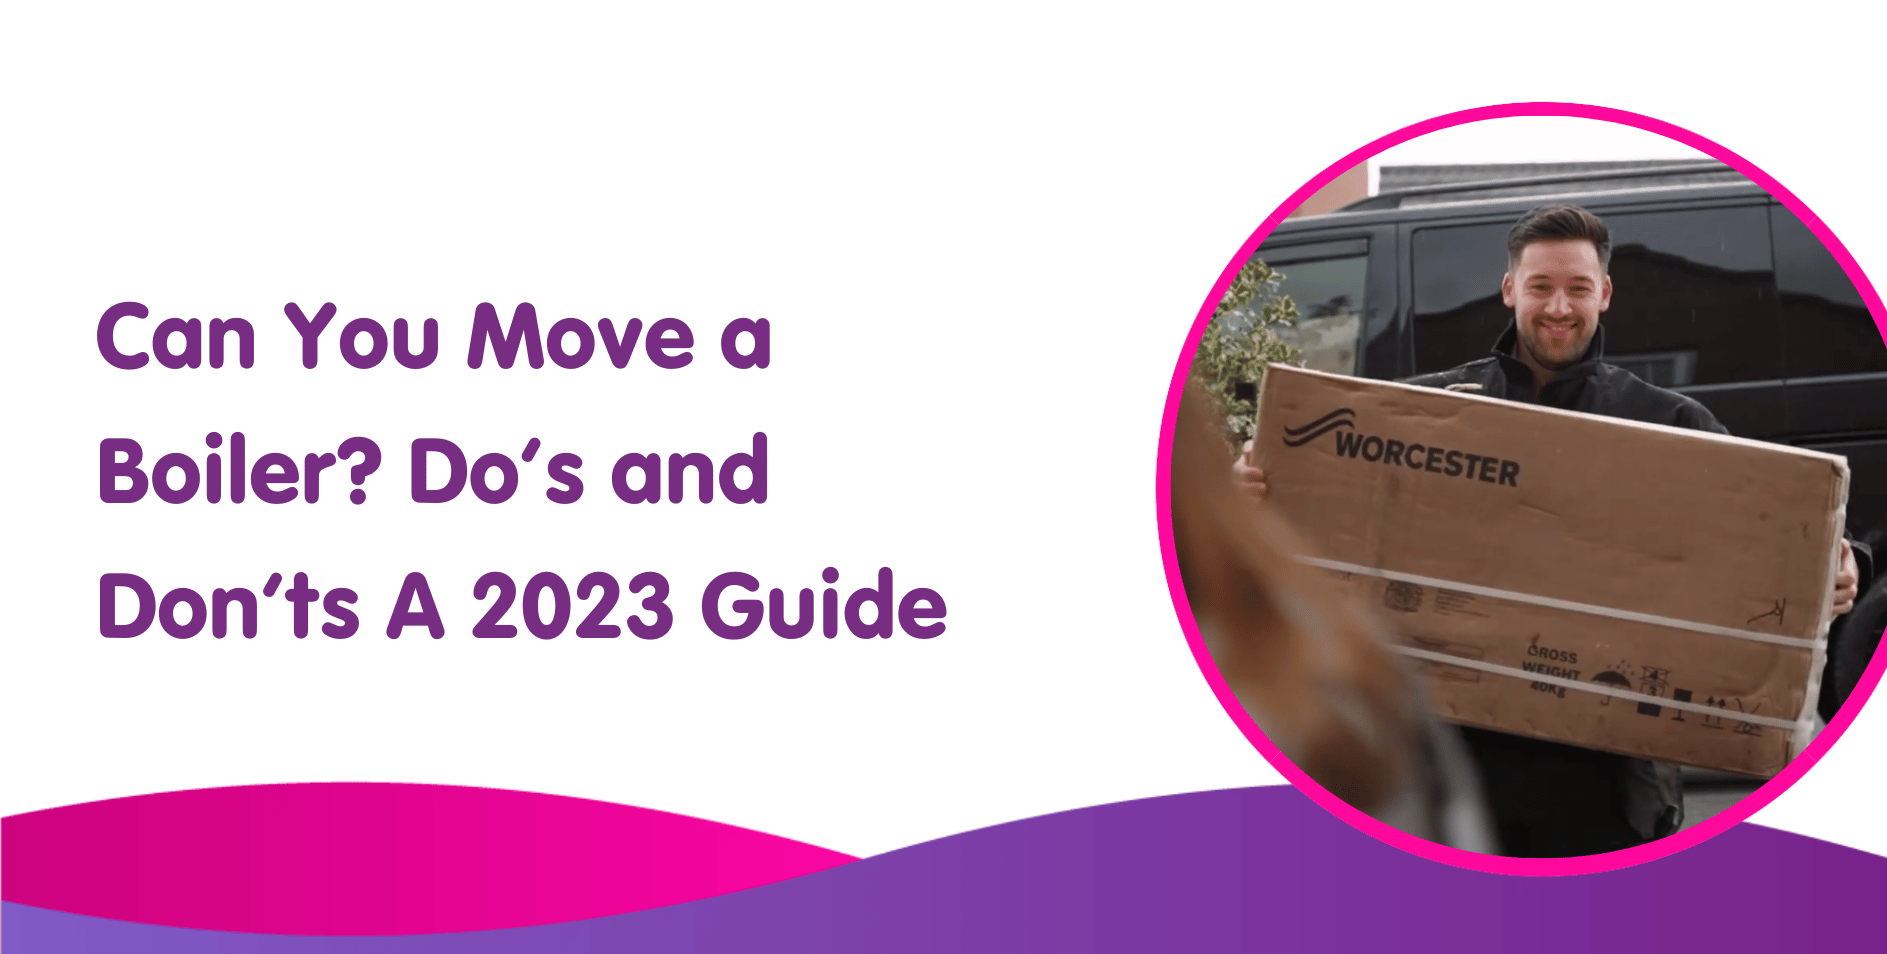 Can You Move a Boiler? Do’s and Don’ts A 2023 Guide